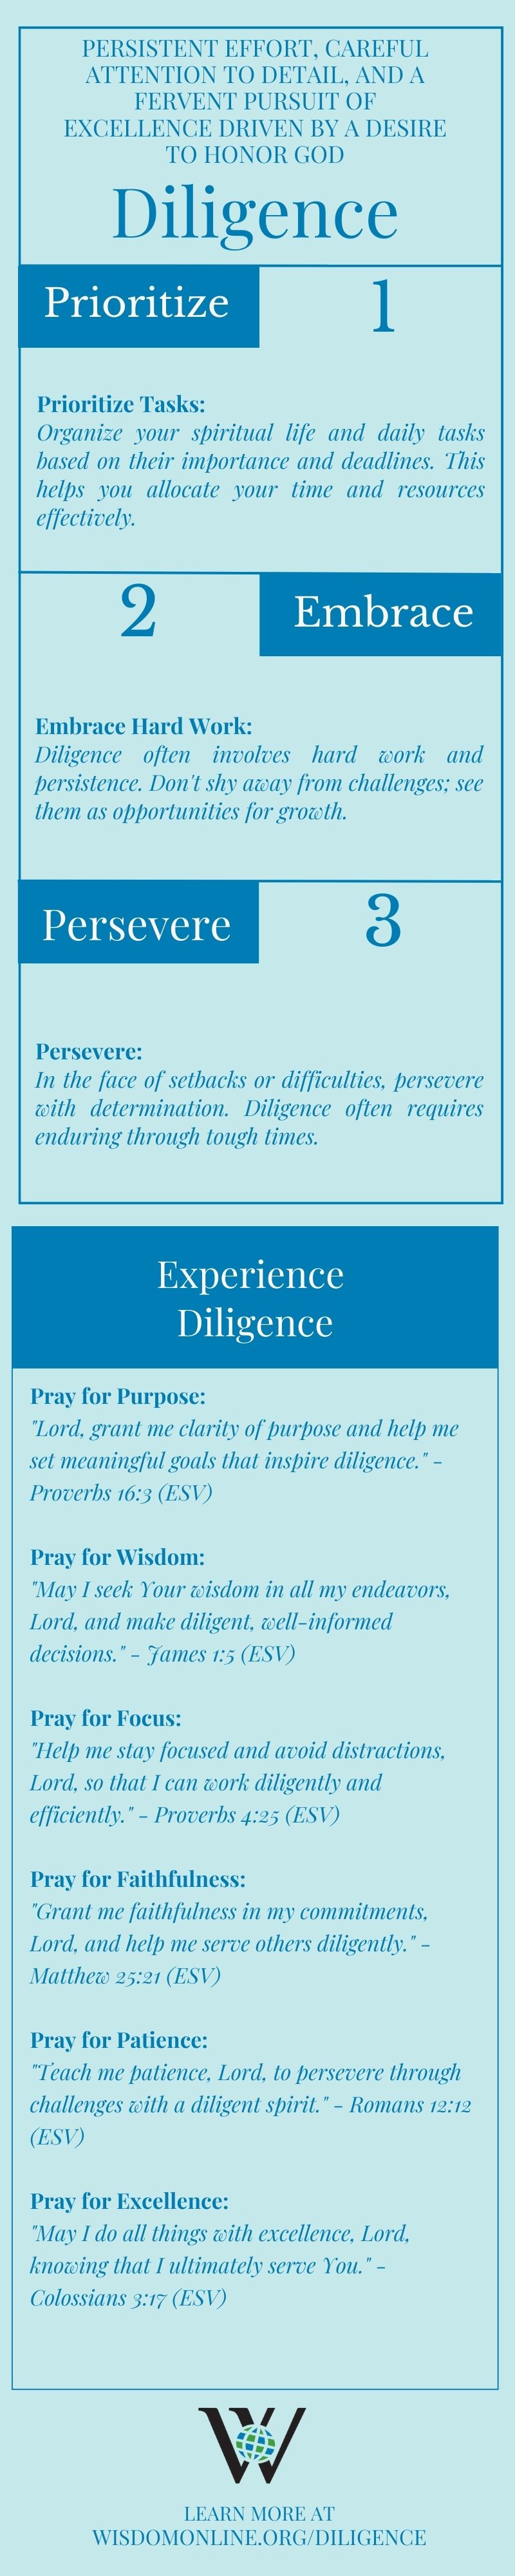 Infographic on the biblical quality of diligence.